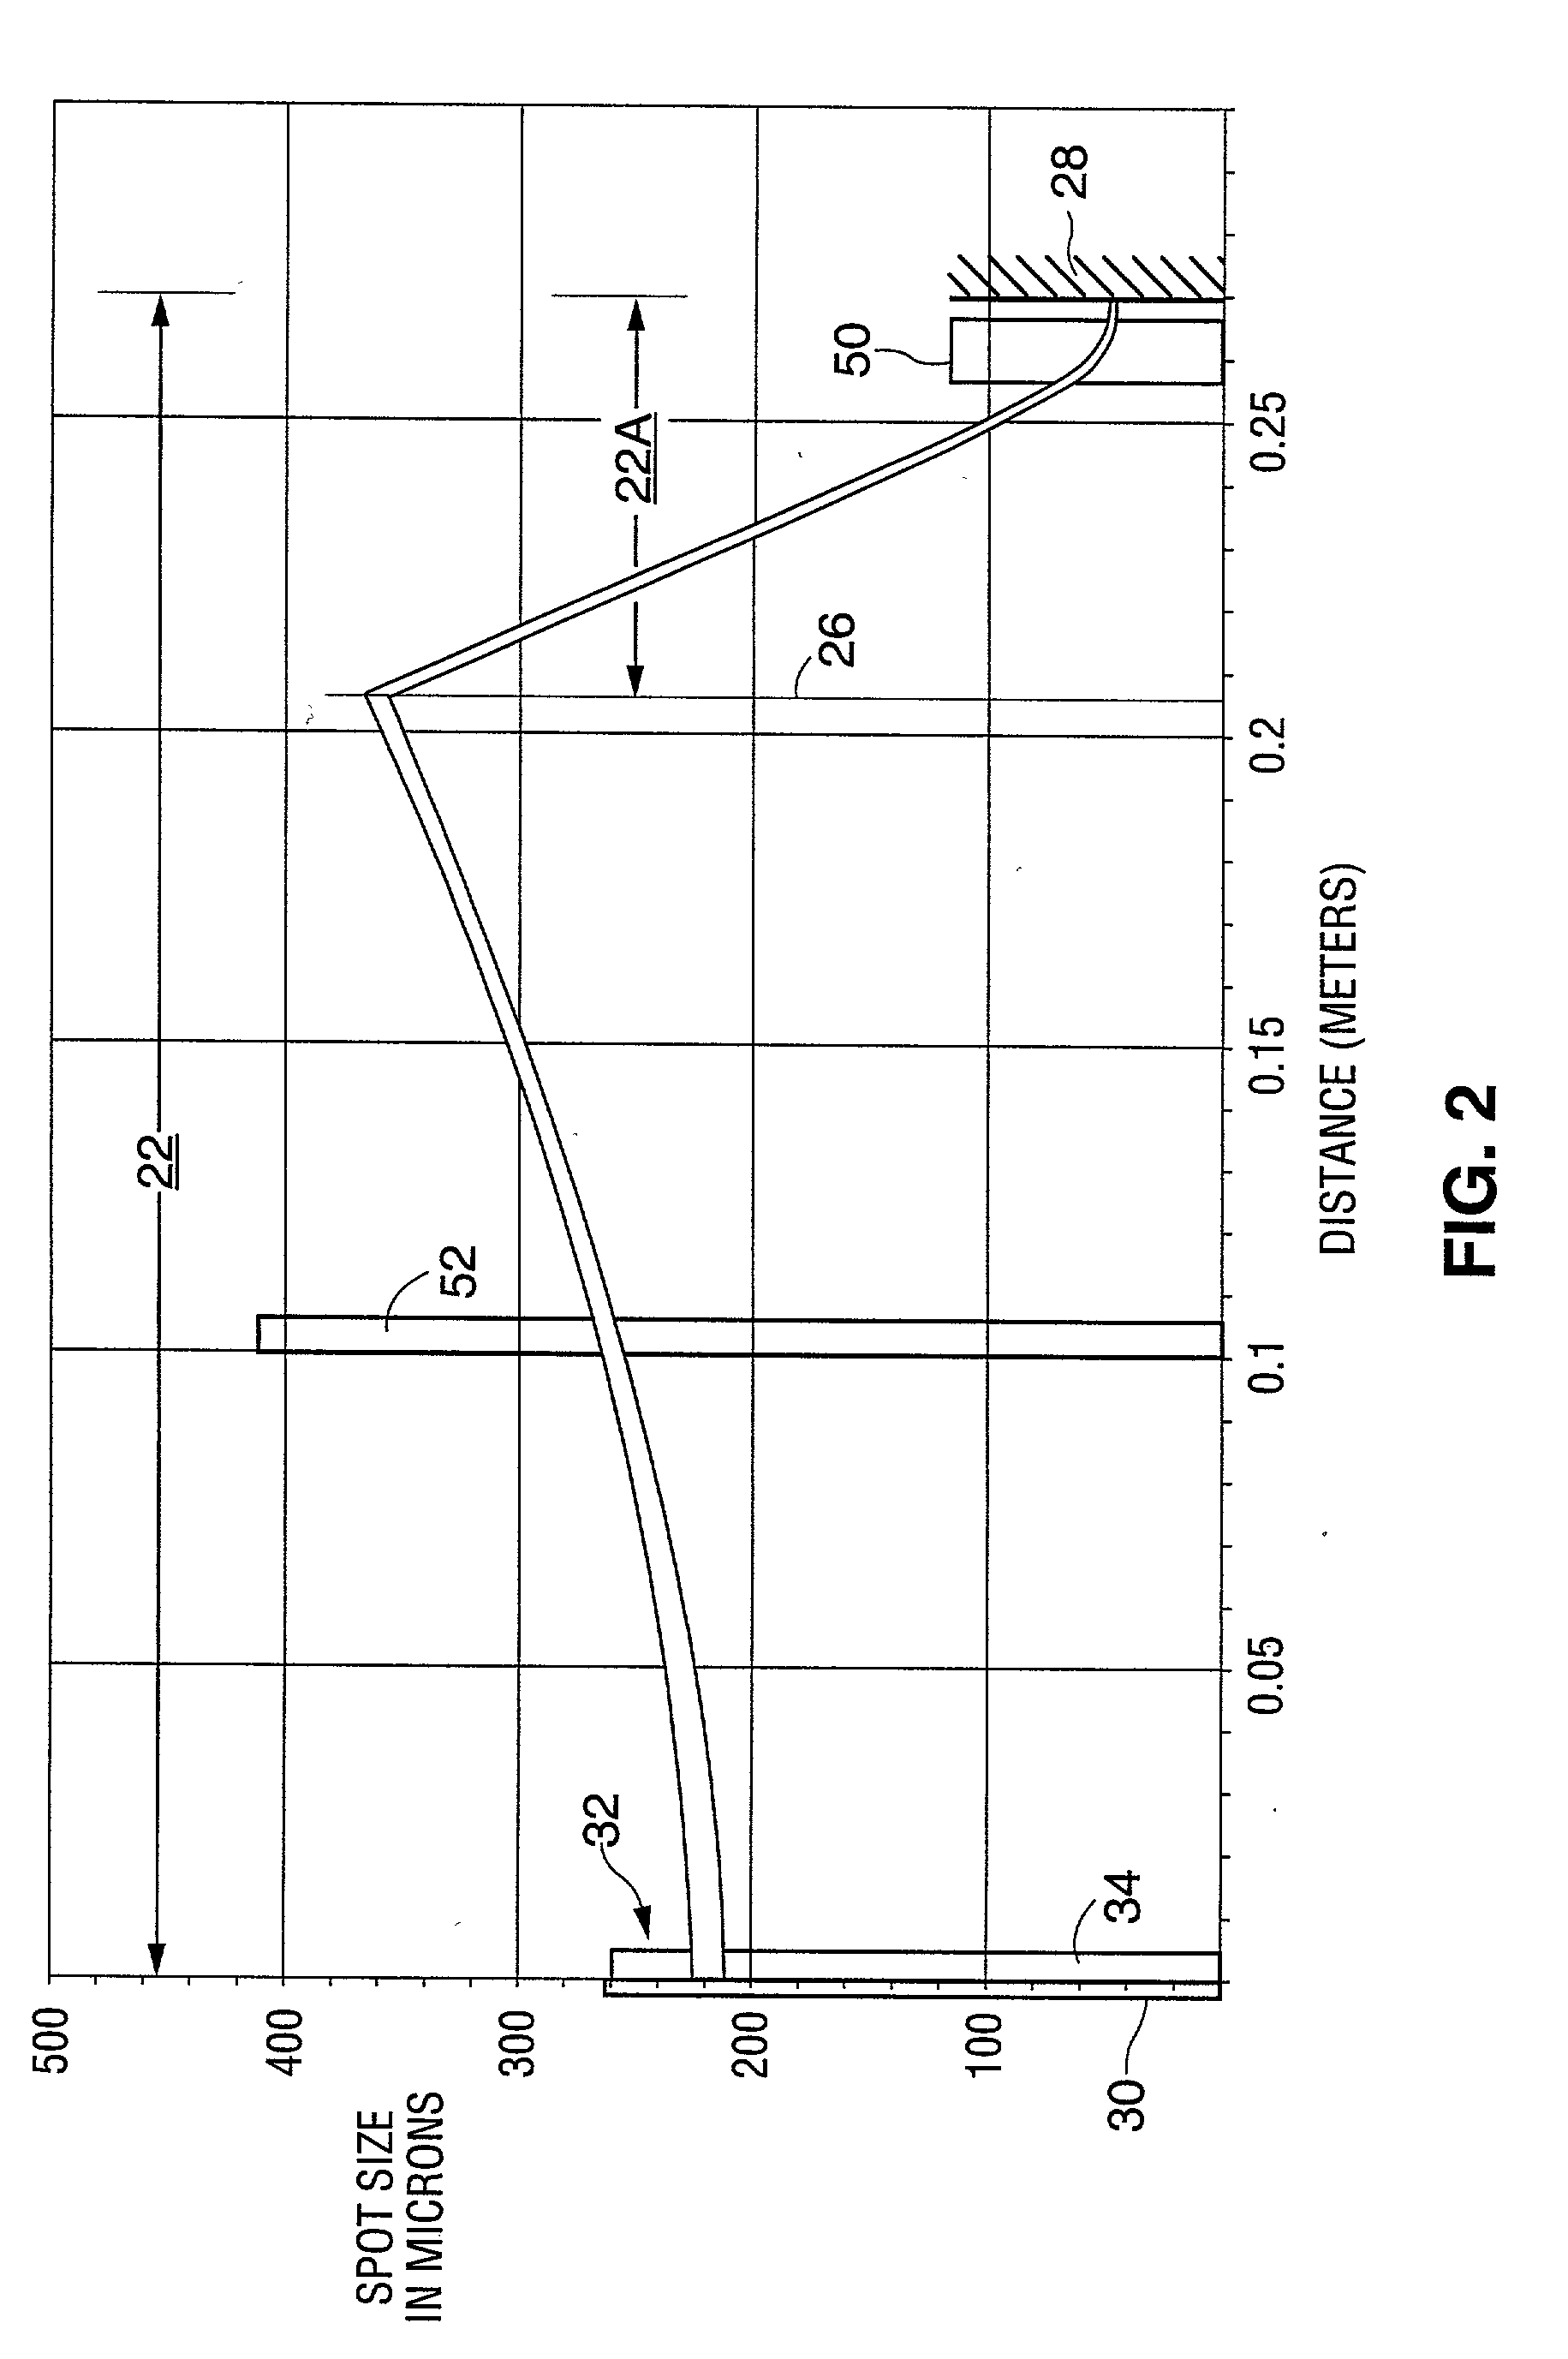 High-power external-cavity optically-pumped semiconductor lasers